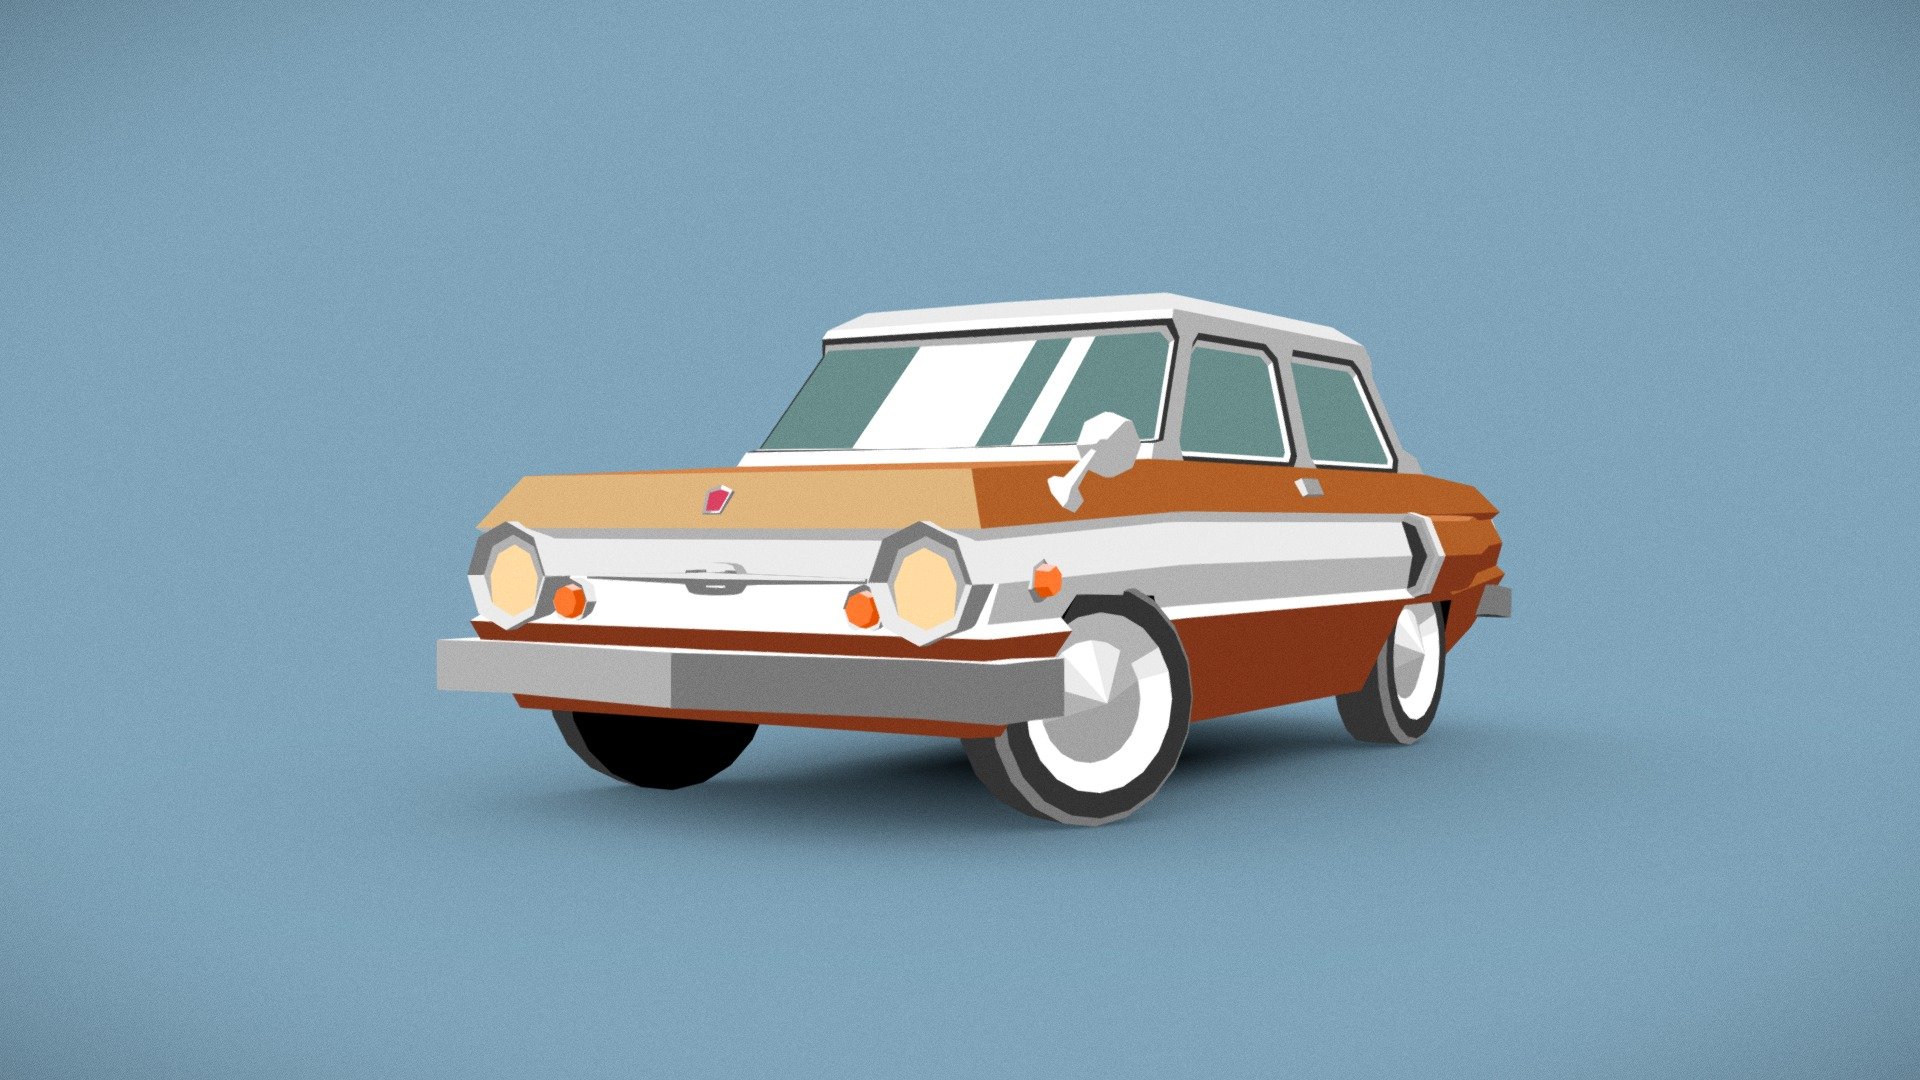 Low poly model of a ZAZ Zaporozhets 968-A car. 

Textured with a range of shades to be used in a mobile game with no lighting needed. 
Inspired by &ldquo;Art Spotlight: #DRIVE